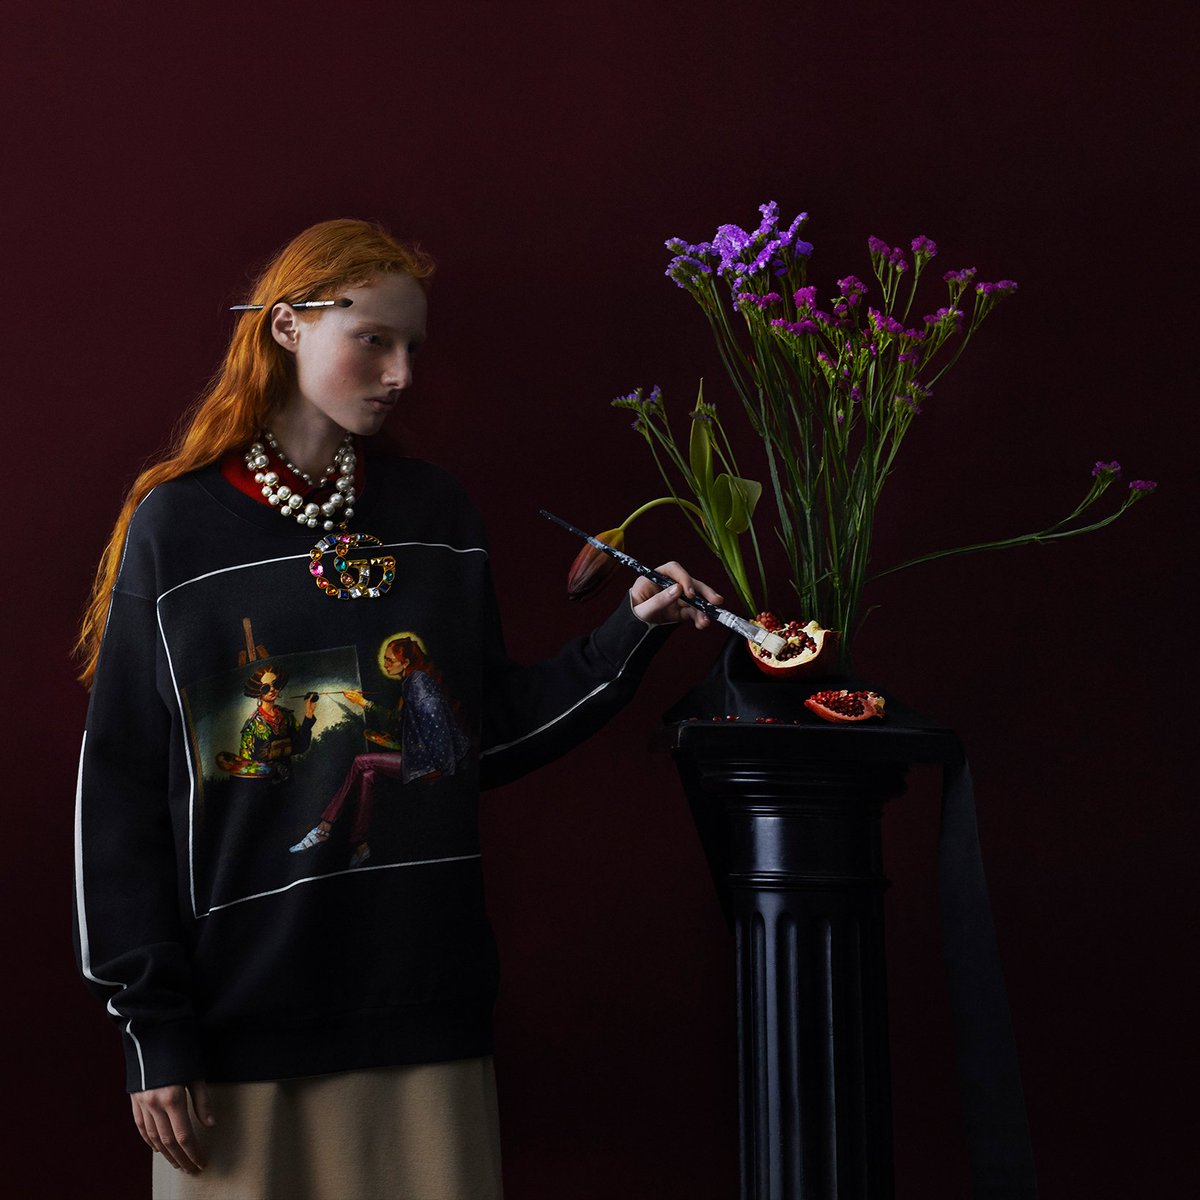 #GucciHallucination: a line-up of sweatshirts and T-shirts featuring the digital artworks by #IgnasiMonreal and numbered with a dedicated label (1 of 200 etc.). Only 200 T-shirts and 100 sweatshirts have been made in each style—available on.gucci.com/_GucciHallucin…
Photo: #JuliaHetta